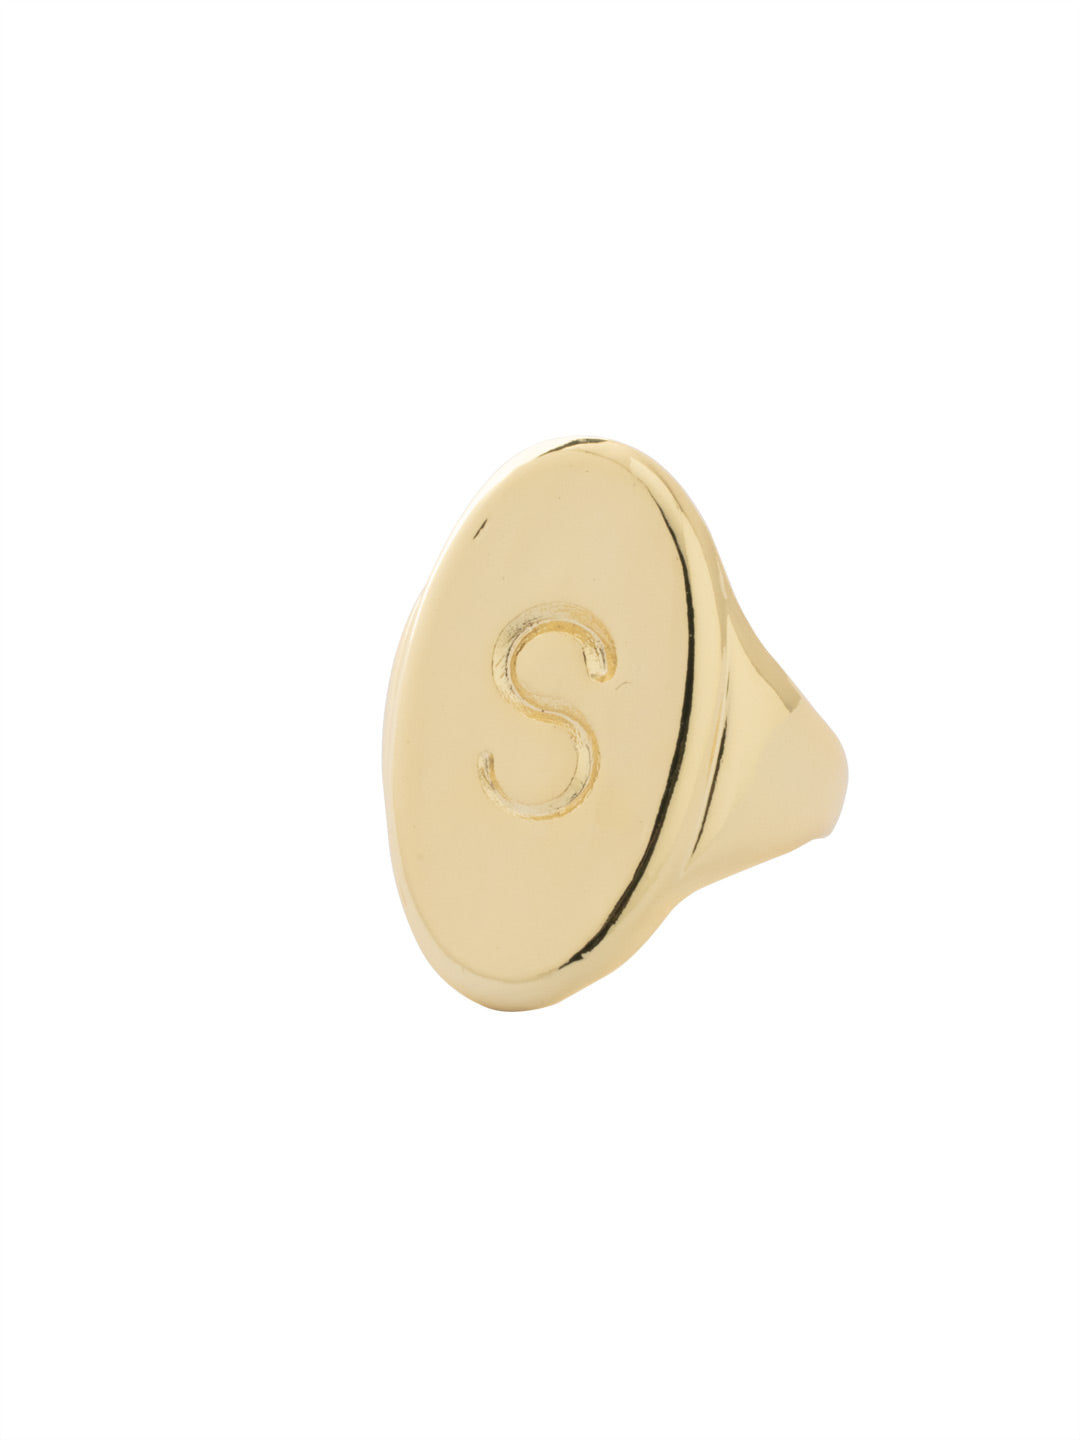 "S" Signet Statement Ring - RFK48BGMTL - <p>The Signet Statement Ring features a capital letter stamped into an oblong metal disk on an adjustable ring band. From Sorrelli's Bare Metallic collection in our Bright Gold-tone finish.</p>